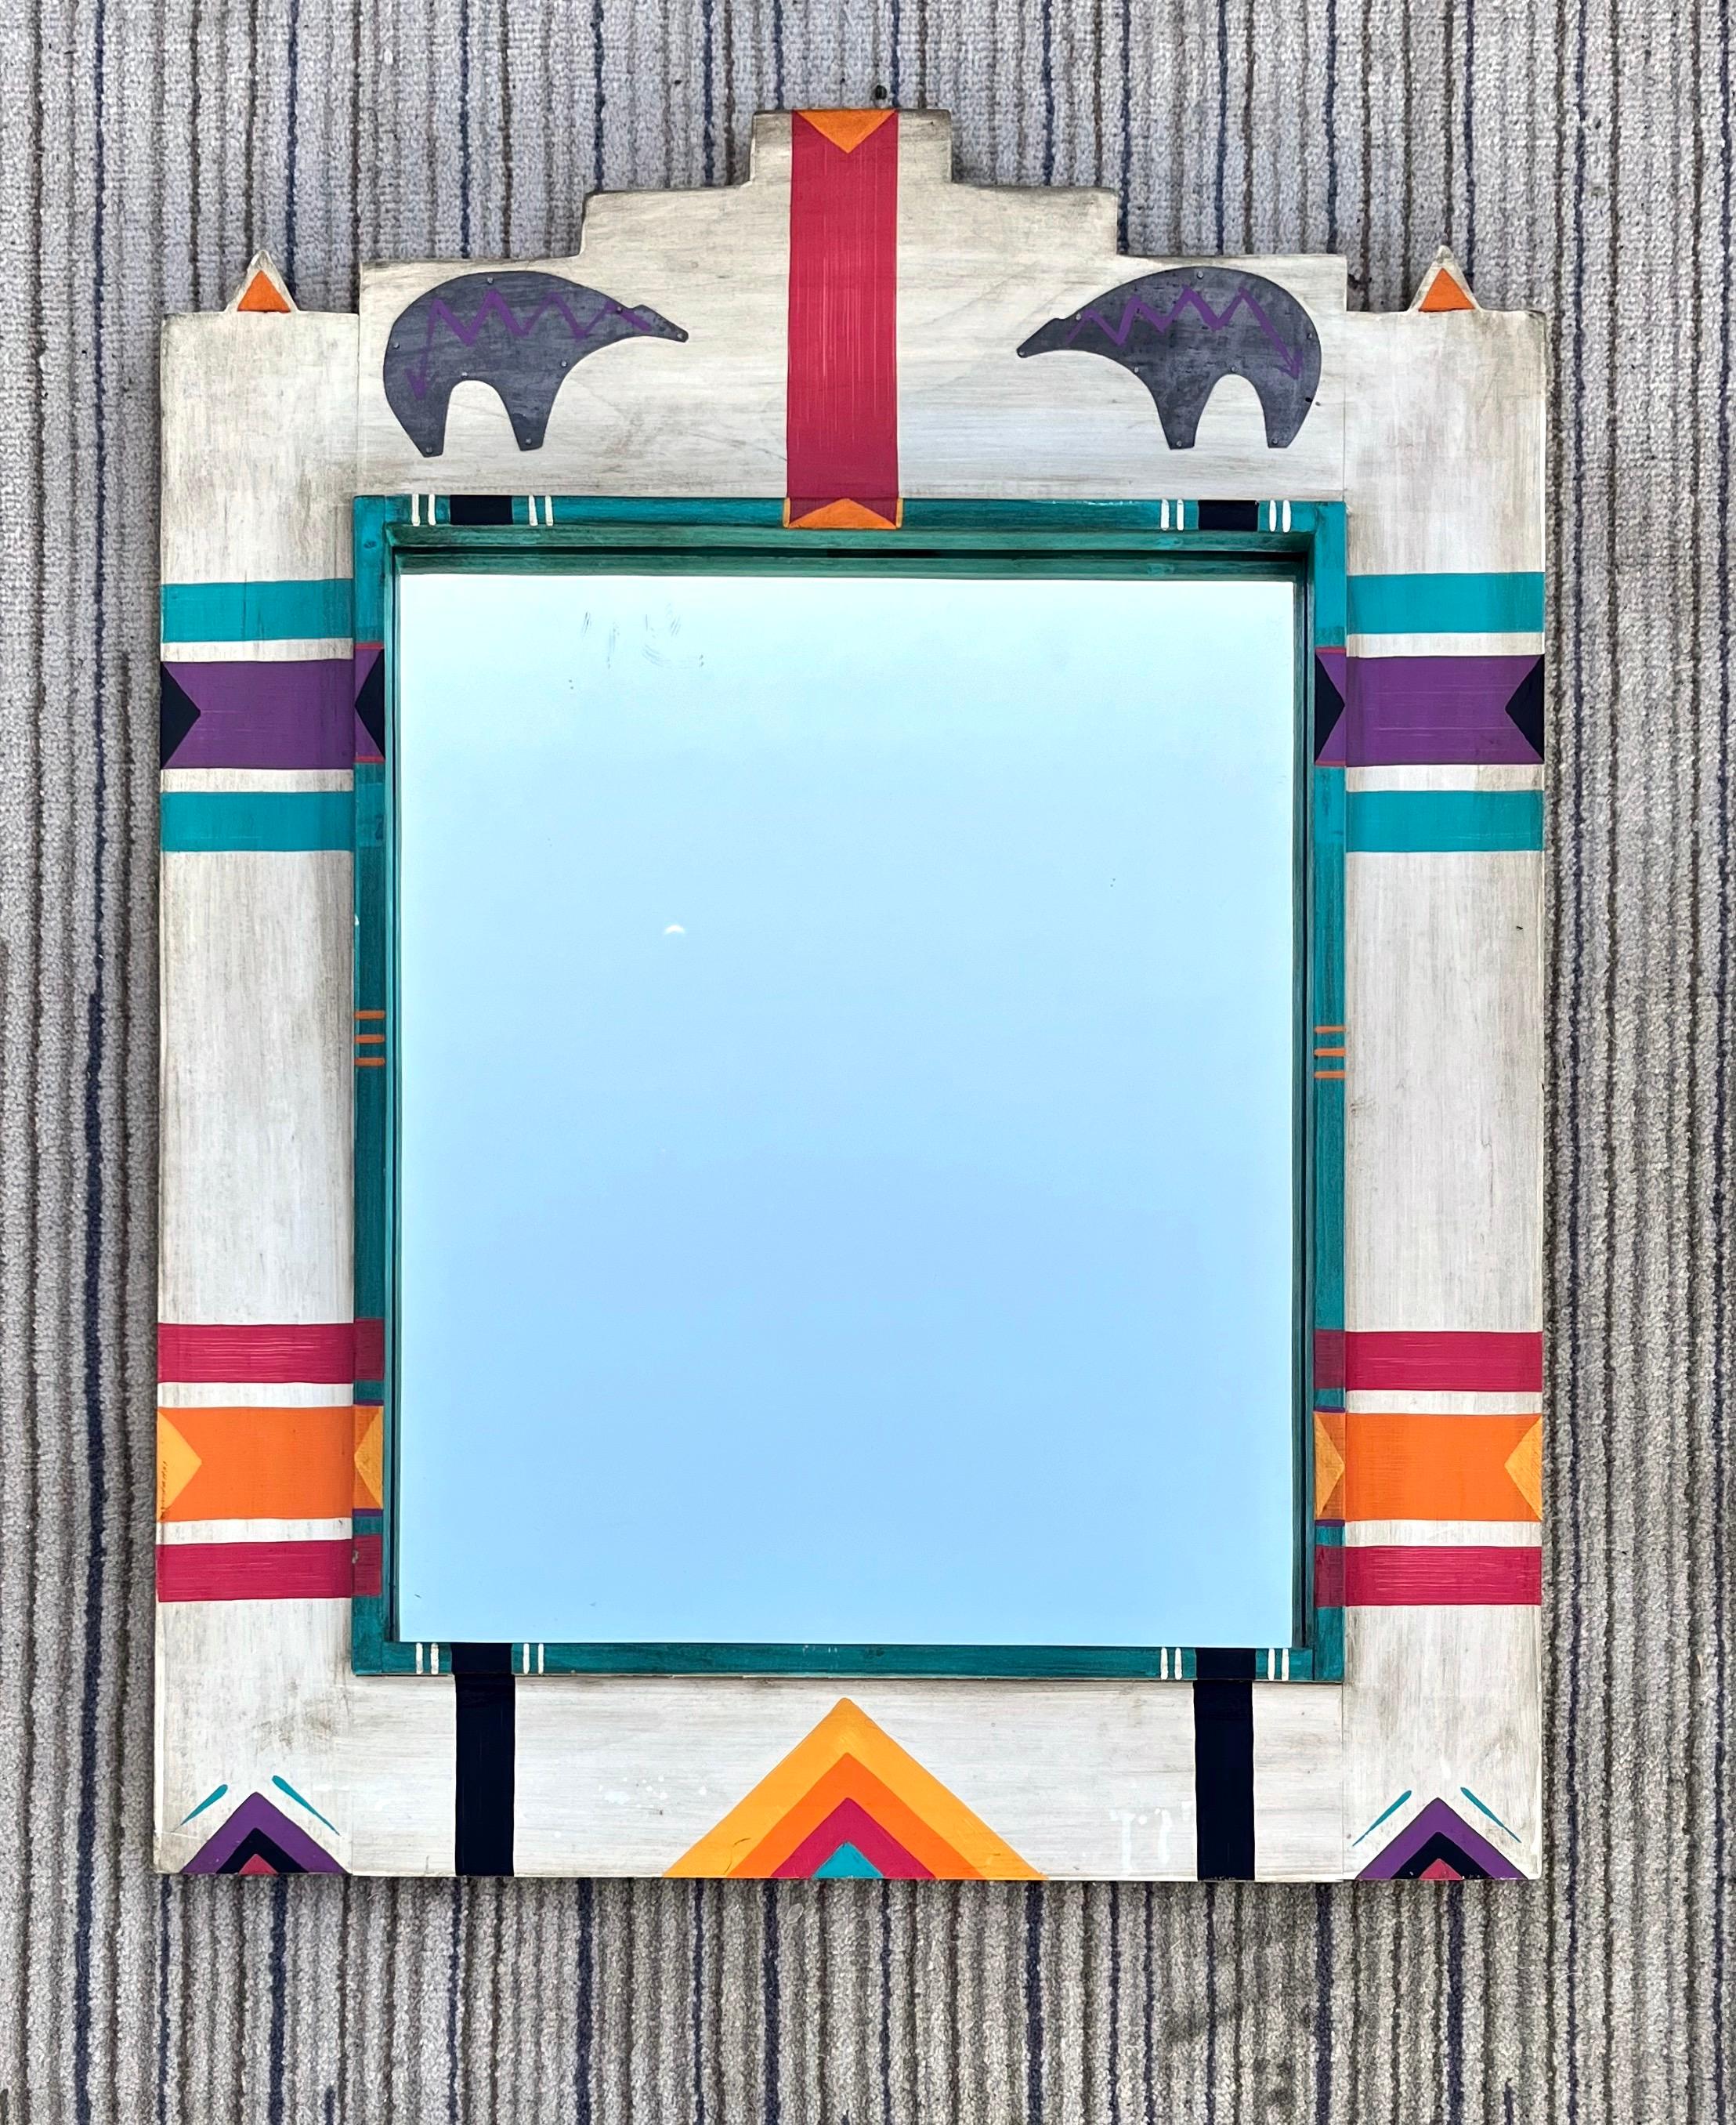 Vintage mid size native American art inspired wall mirror. circa 1980s
Features an off white hand painted solid wood frame with two galvanized metal sheet bear appliqués. 
In excellent original condition, with minor signs of wear and age. Please